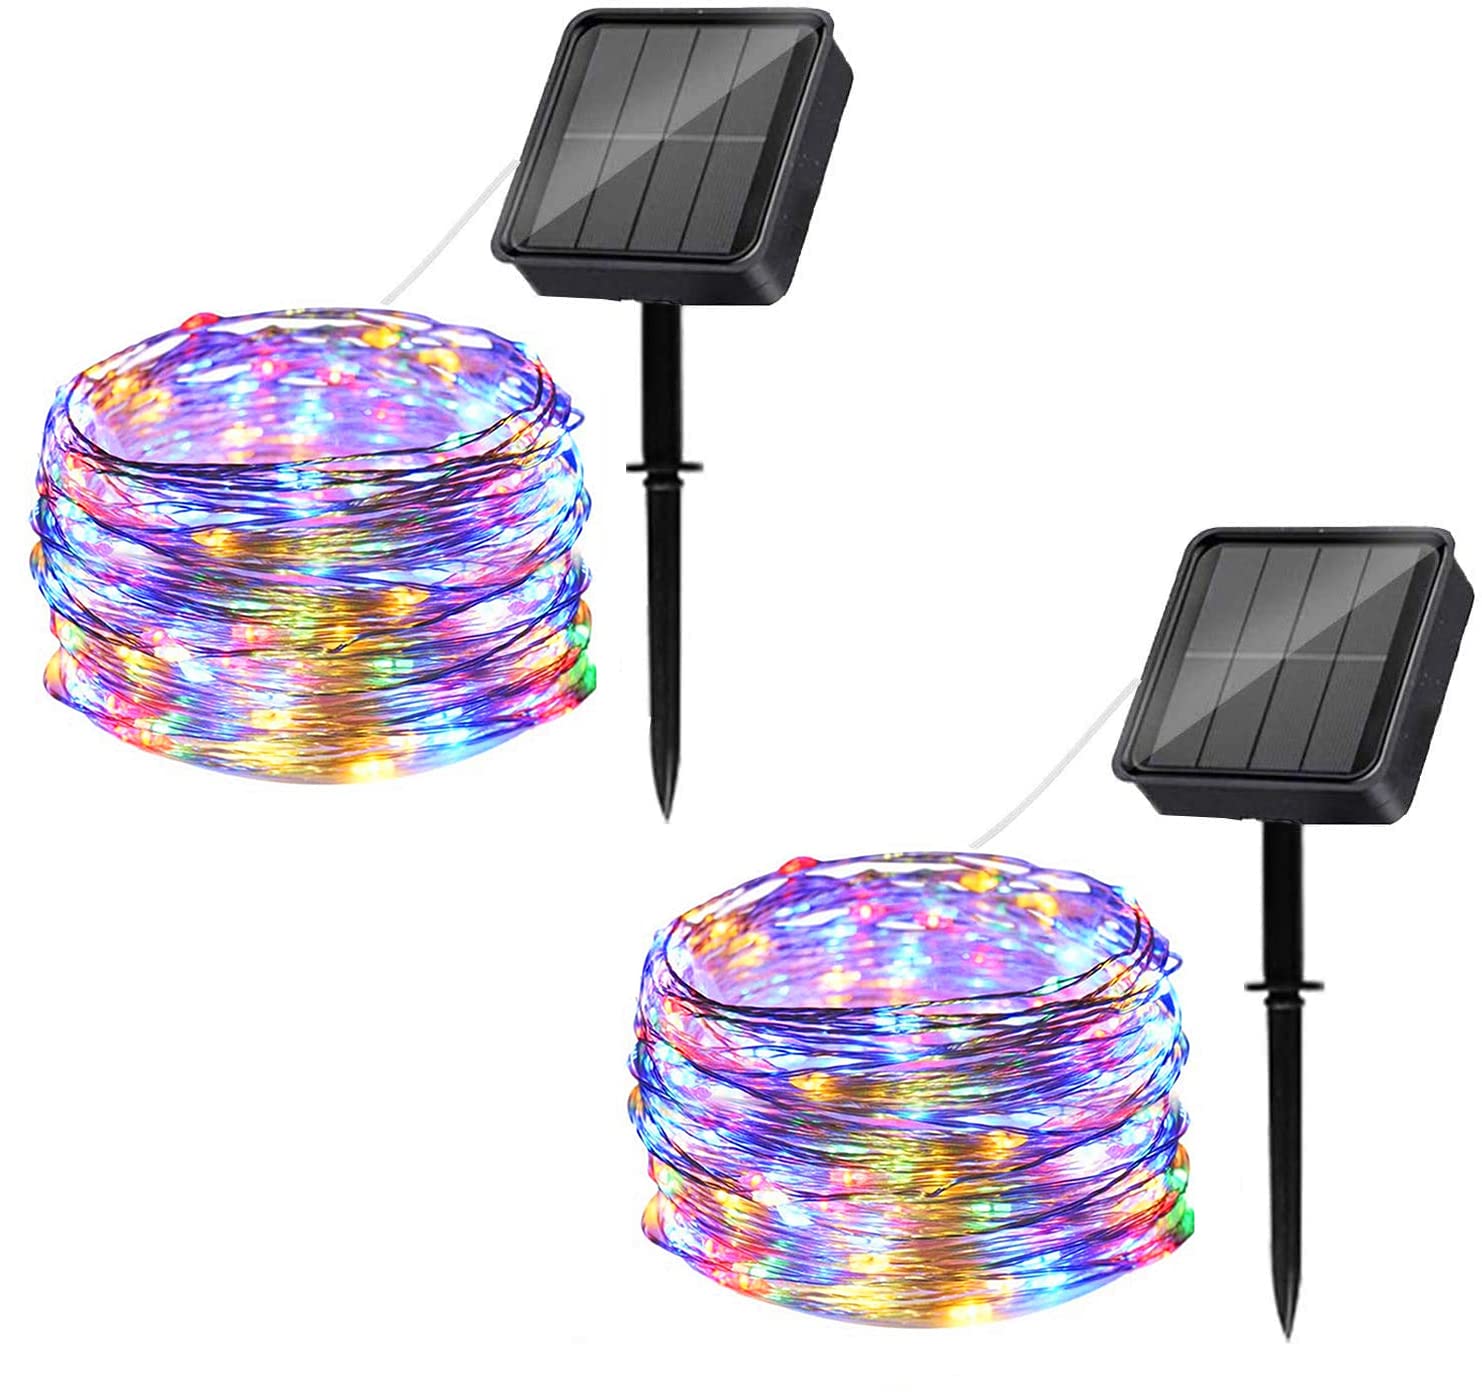 Solar String Lights Outdoor, 10M/33Ft 100 LED Outdoor Solar Garden Fairy Lights Multi-Coloured Waterproof Copper Wire 8 Modes,Decorative Lighting for Home,Patio,Yard,Party,Wedding [2 Pack]